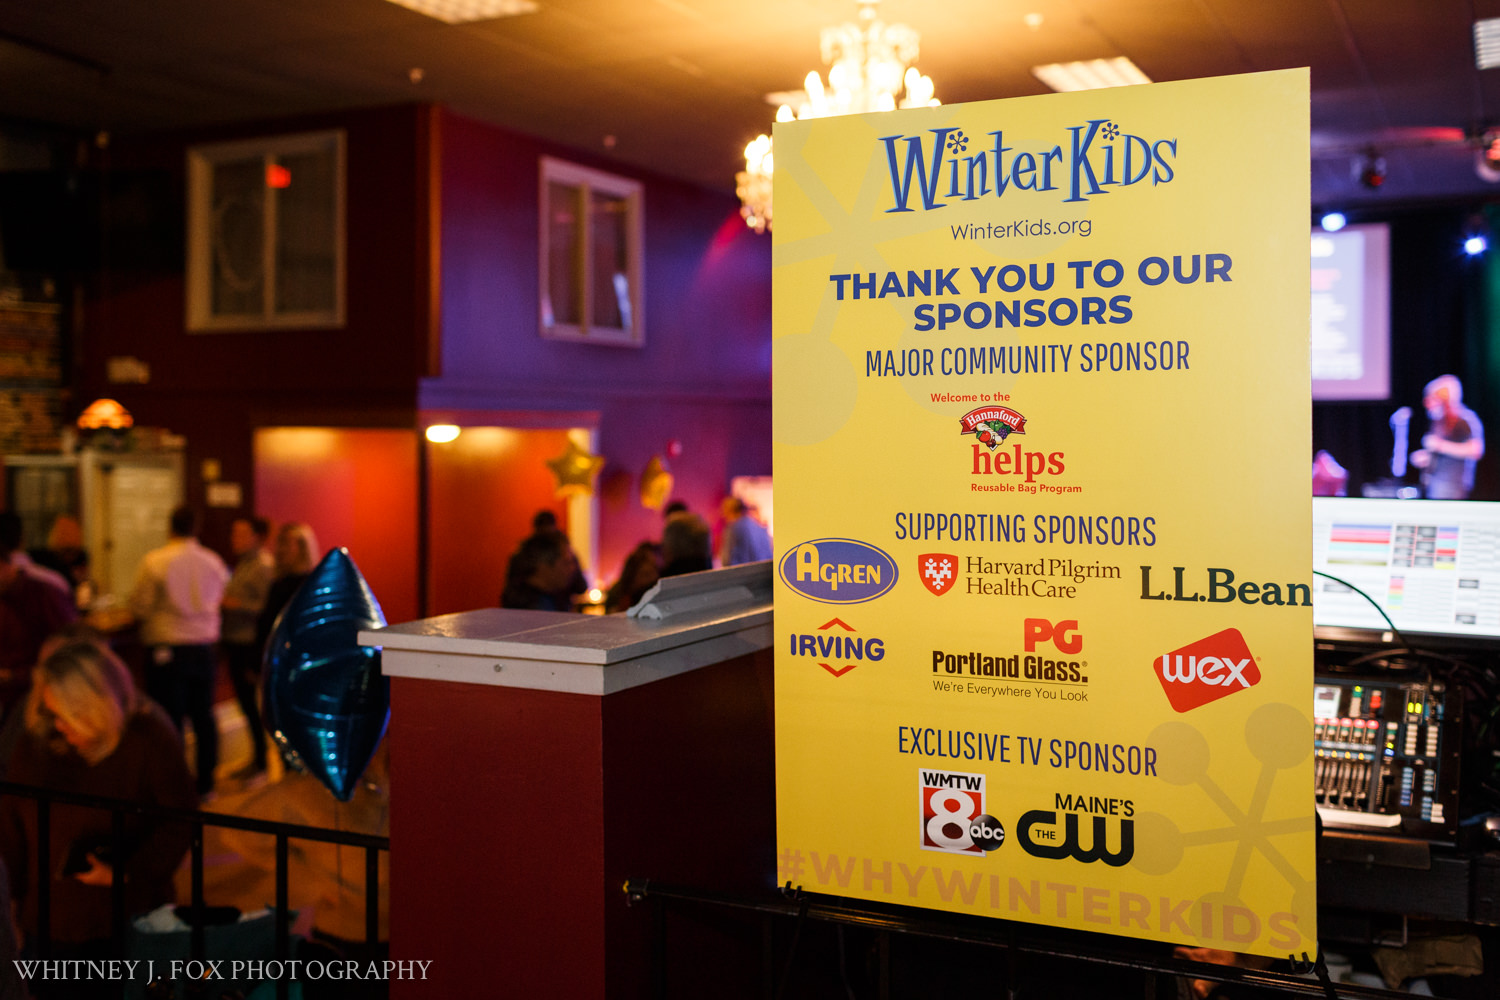 7 winterkids license to chill fundraiser 2019 portland house of music portland maine event photographer whitney j fox 6153 w